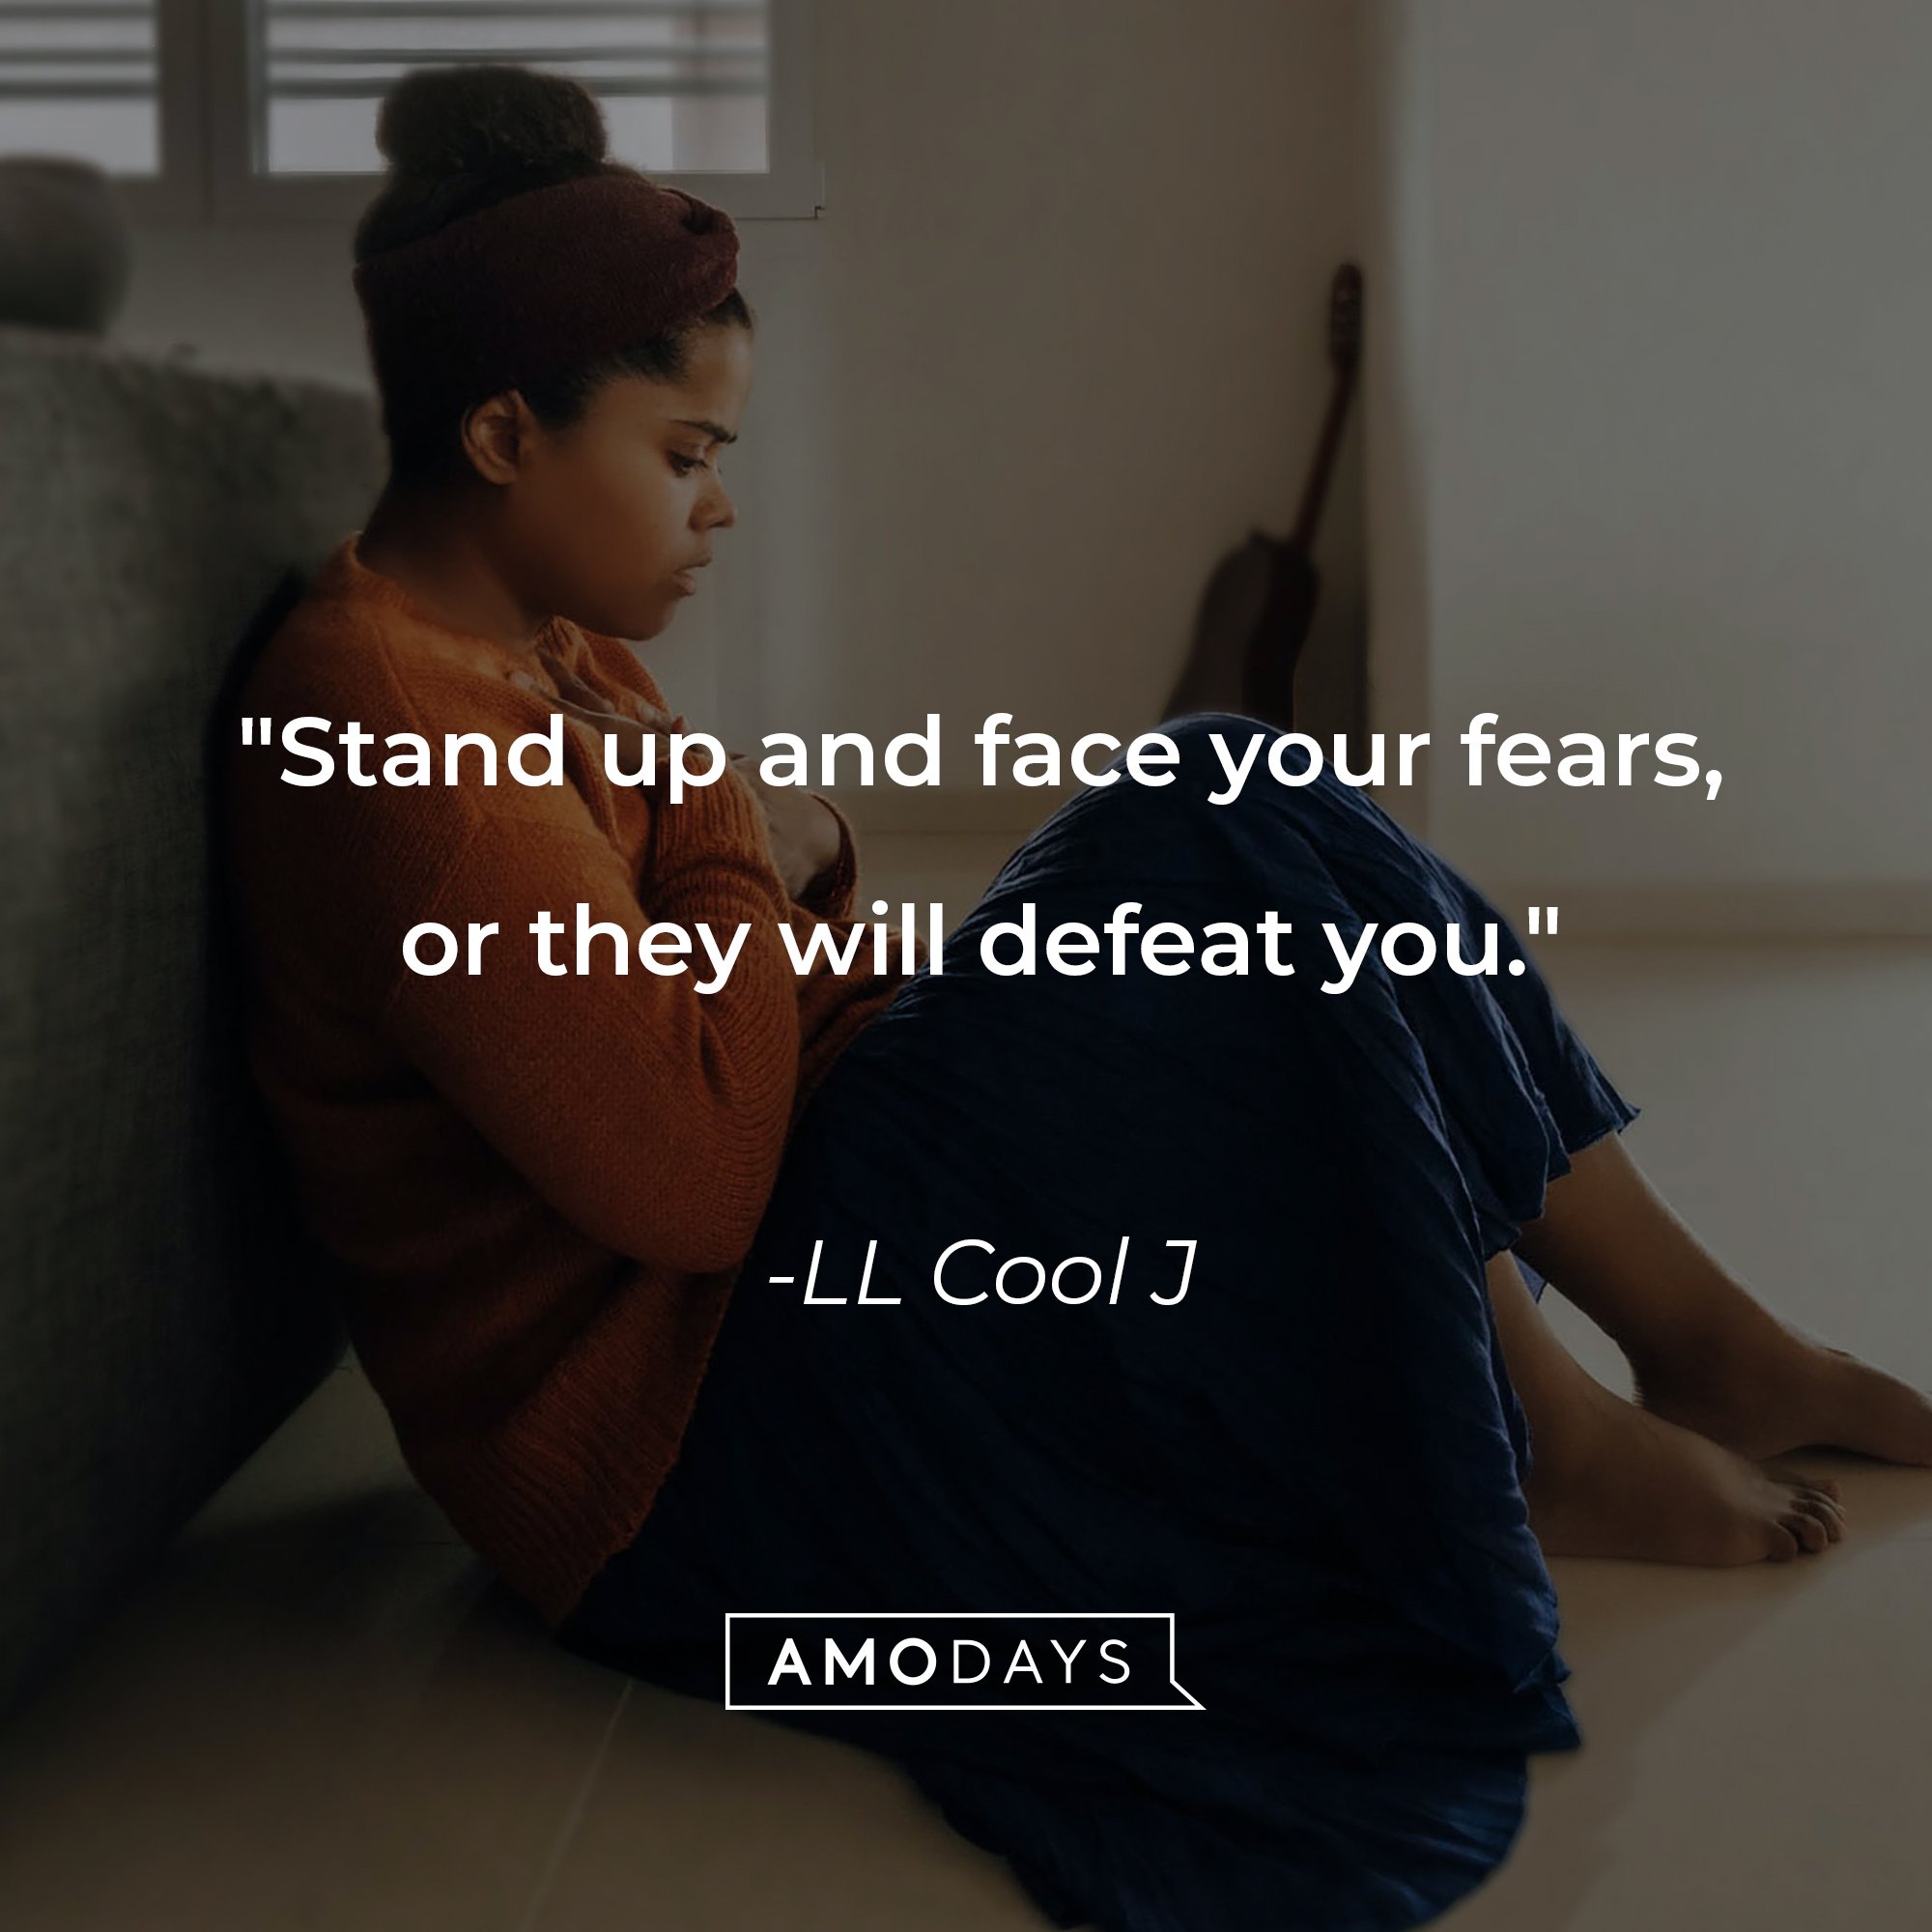 LL Cool J's quote: "Stand up and face your fears, or they will defeat you." | Image: AmoDays